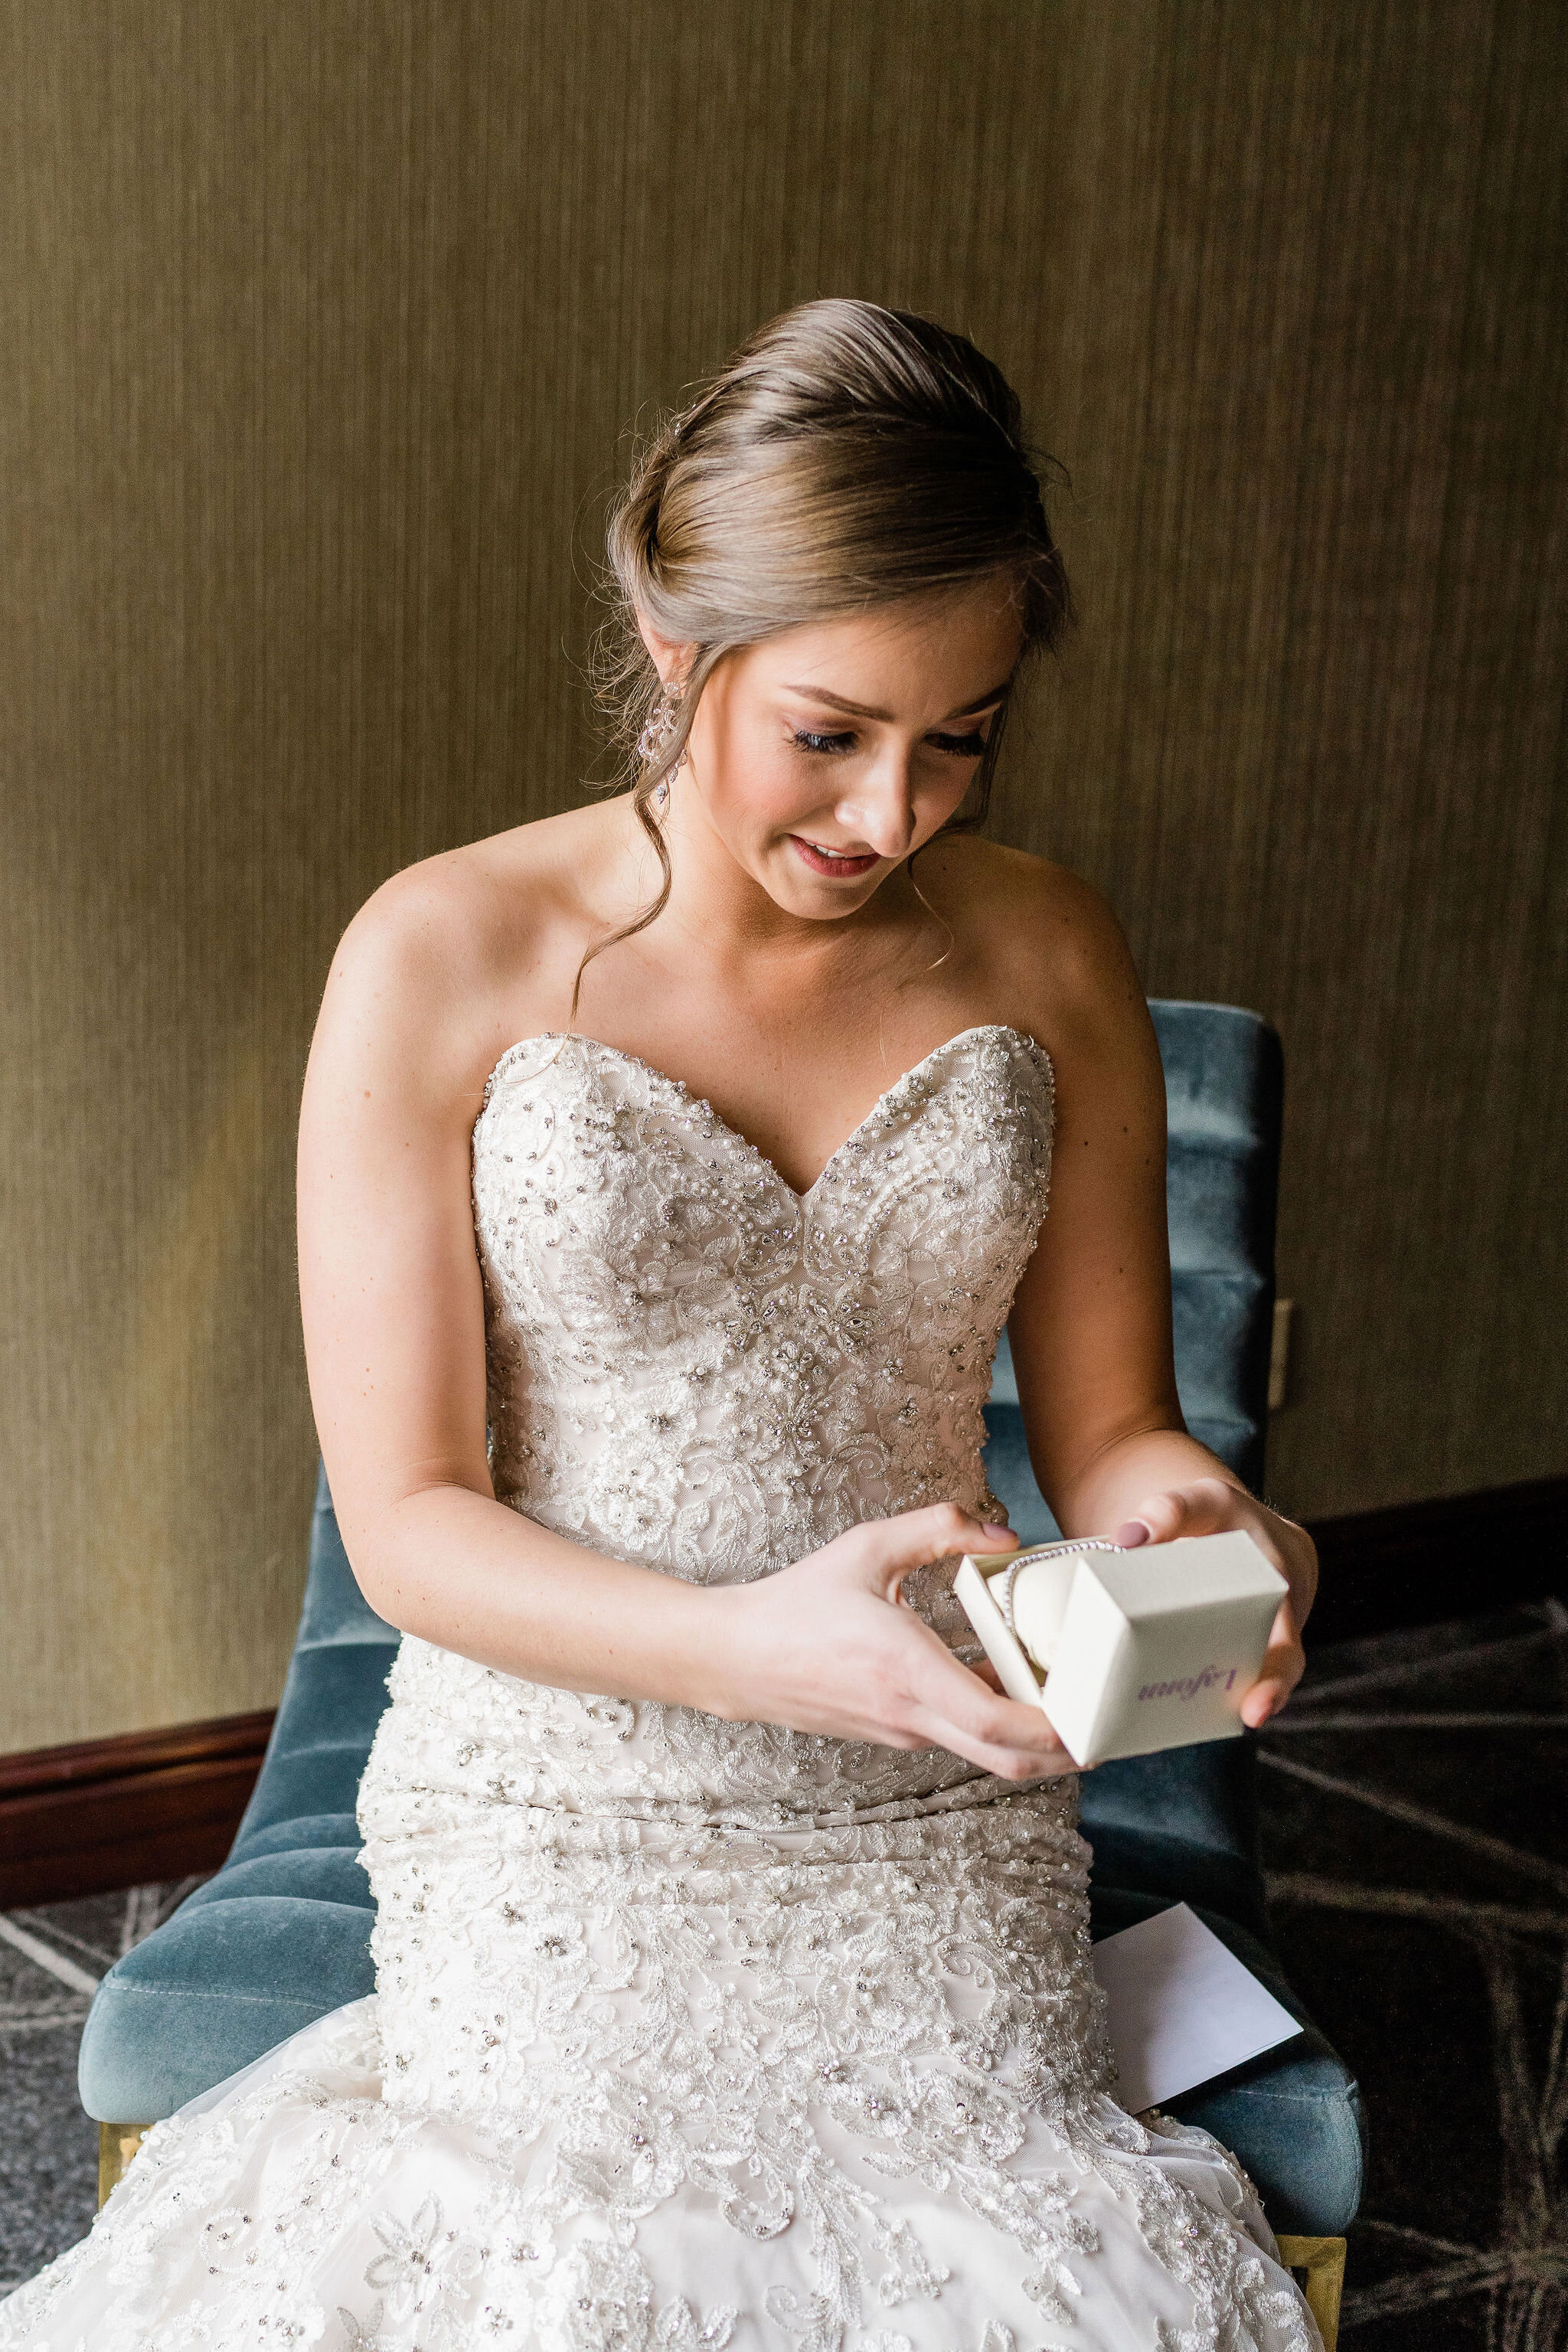 Bride opening up a gift from the groom